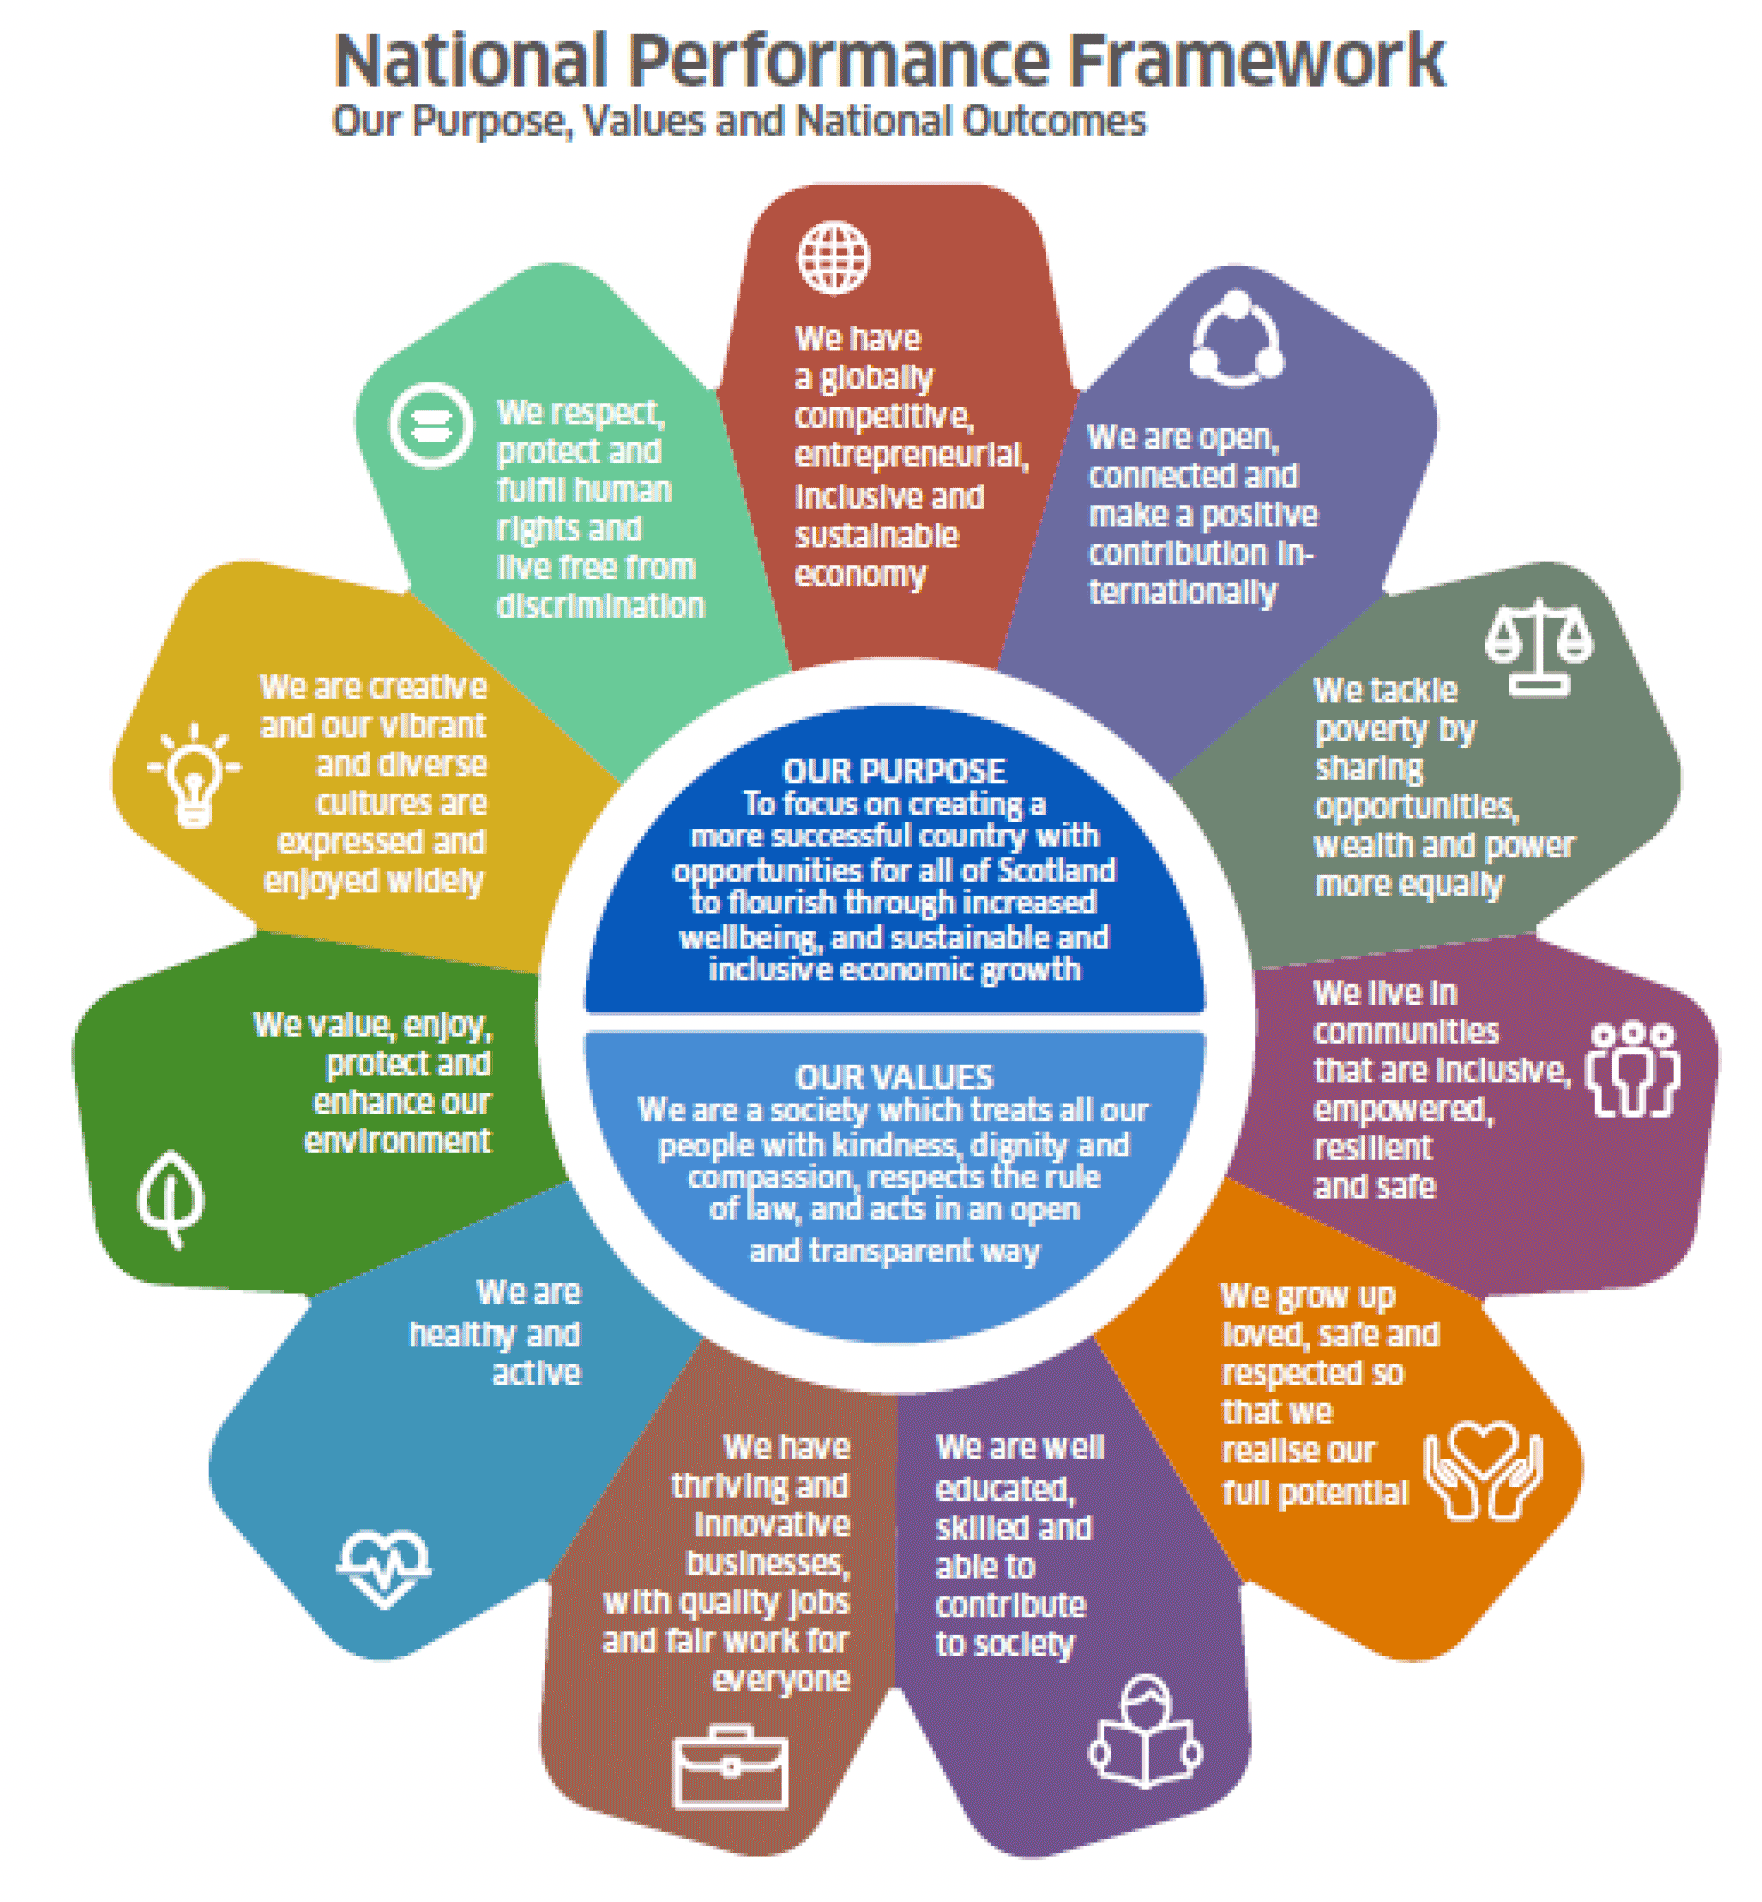 Colourful graphic displaying the 11 national outcomes of the National Performance Framework